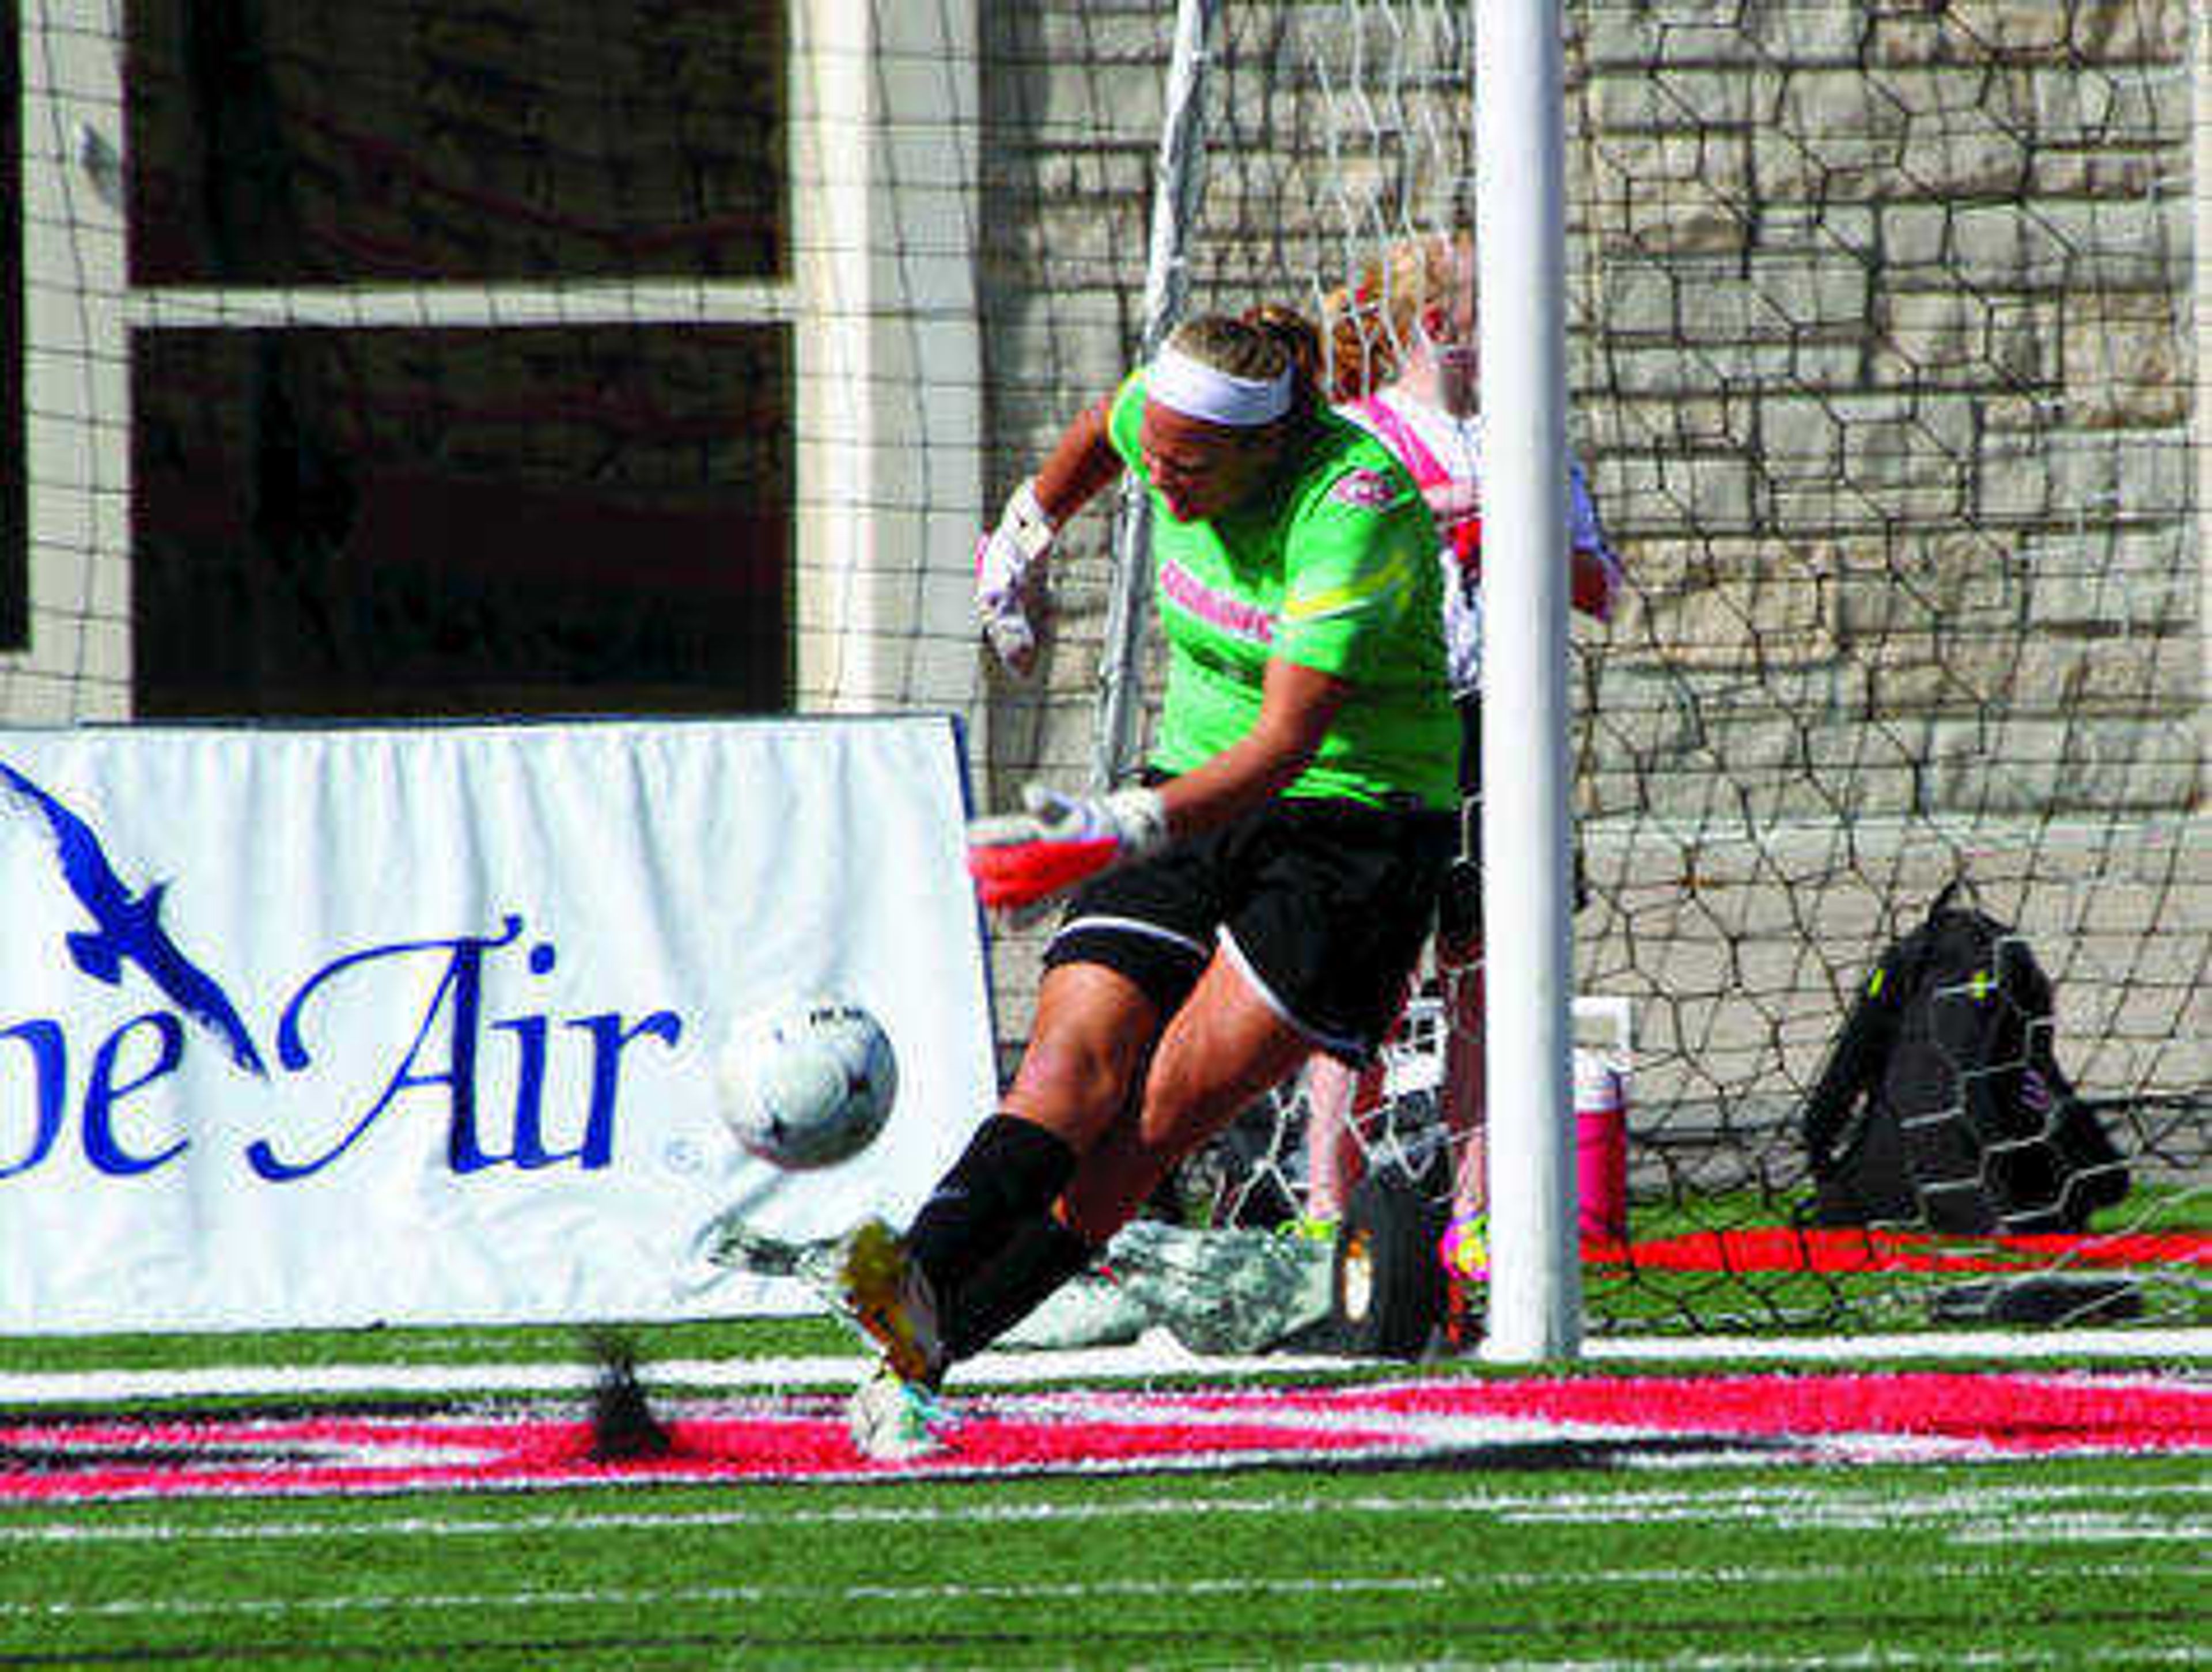 Kindra Lierz kicks the ball away from the goal against Morehead State on Oct. 19 at Houck Stadium. Photo by Mark Mahnke/Southeast Missouri Athletics